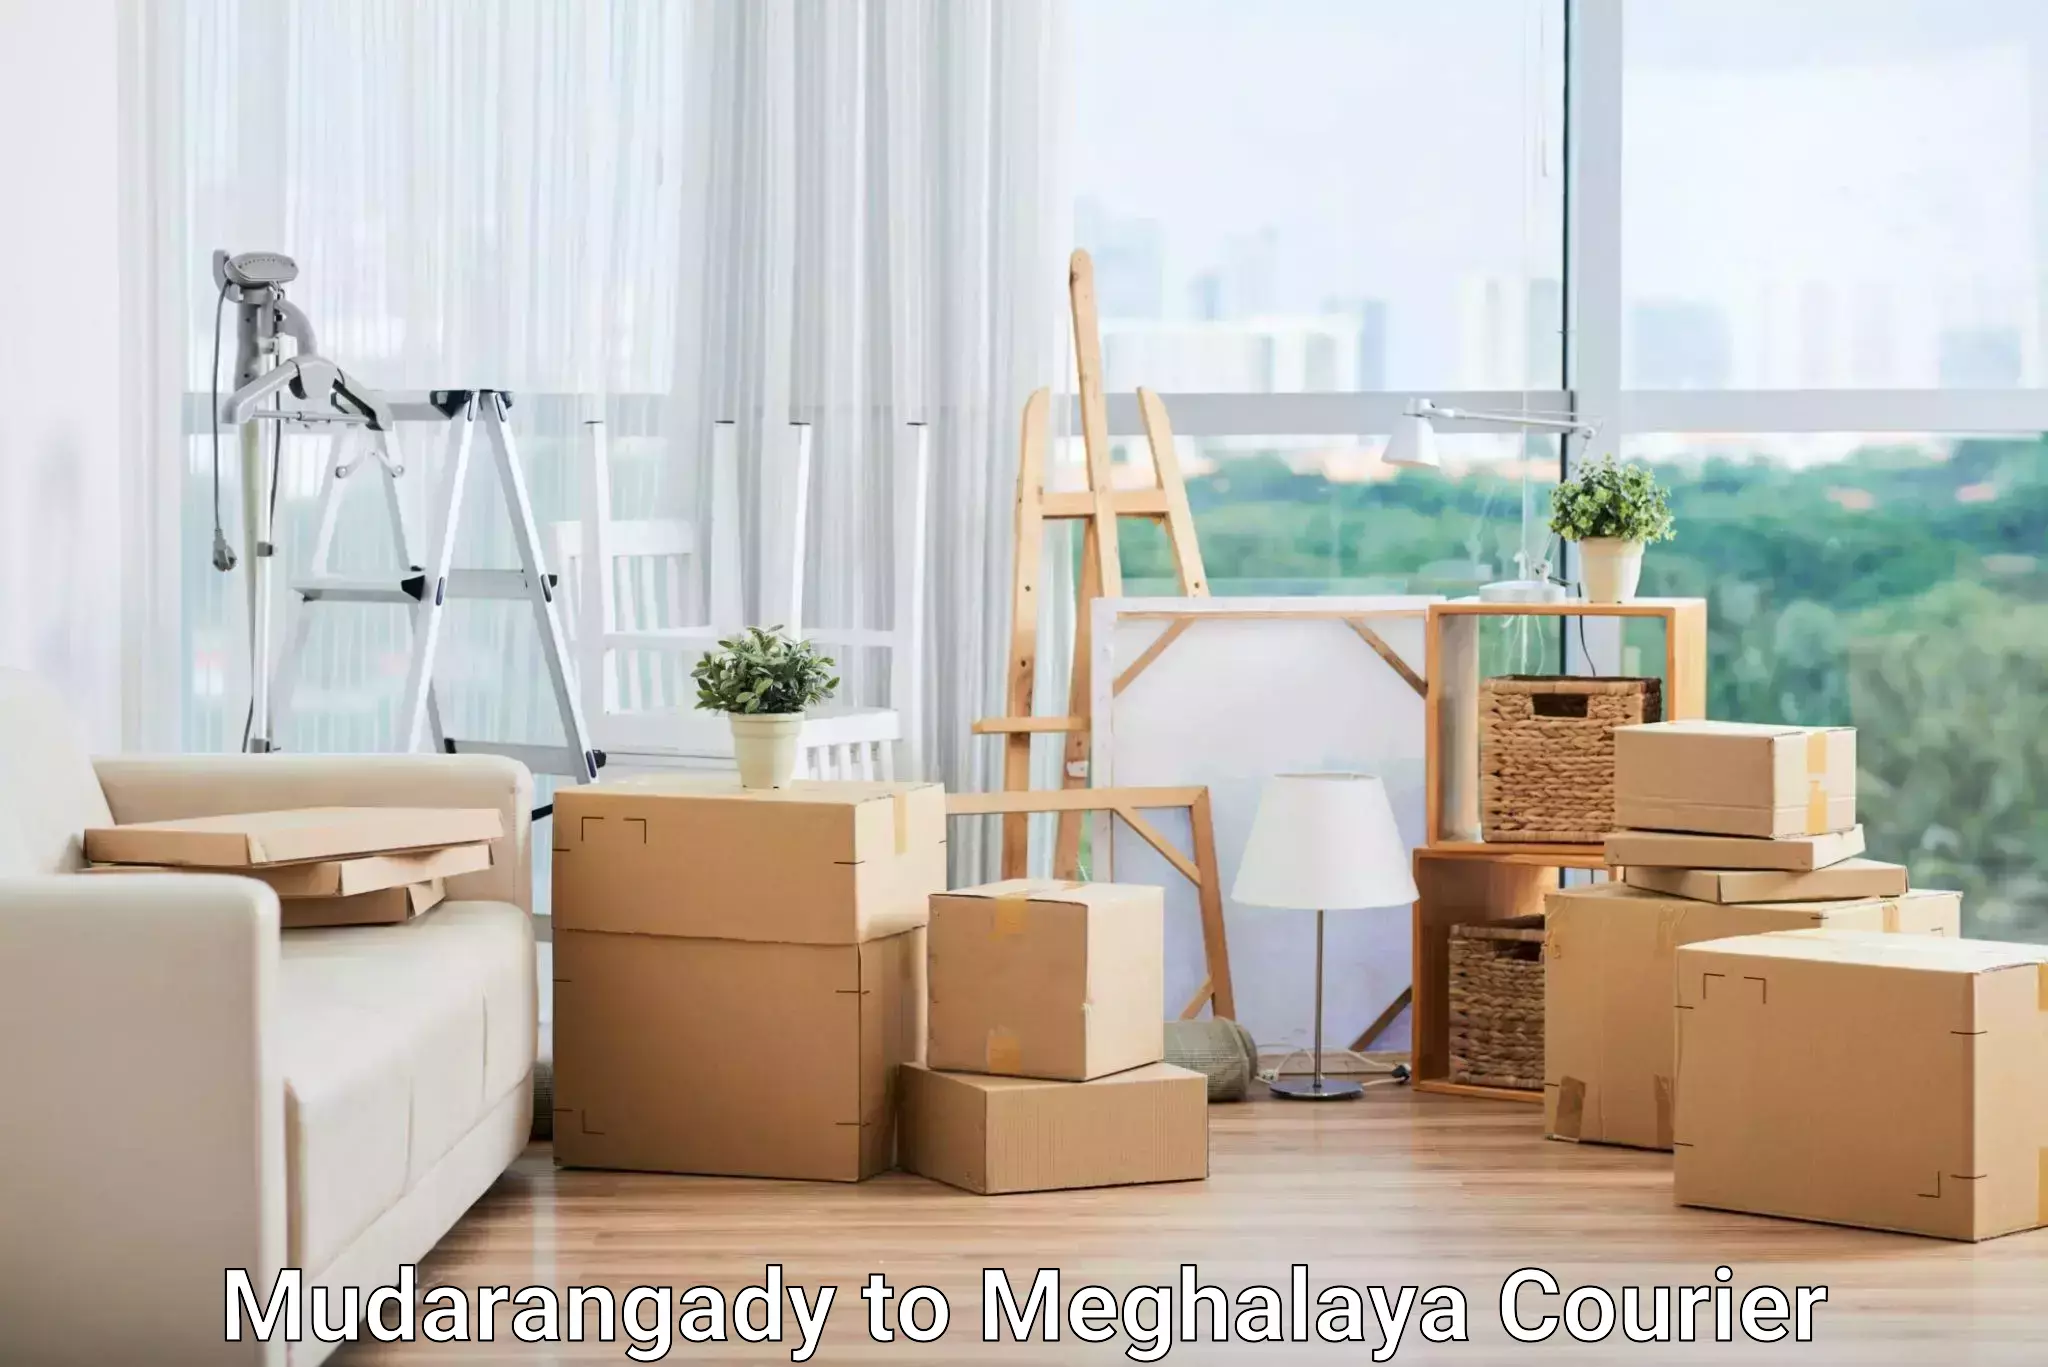 Sustainable delivery practices Mudarangady to Meghalaya